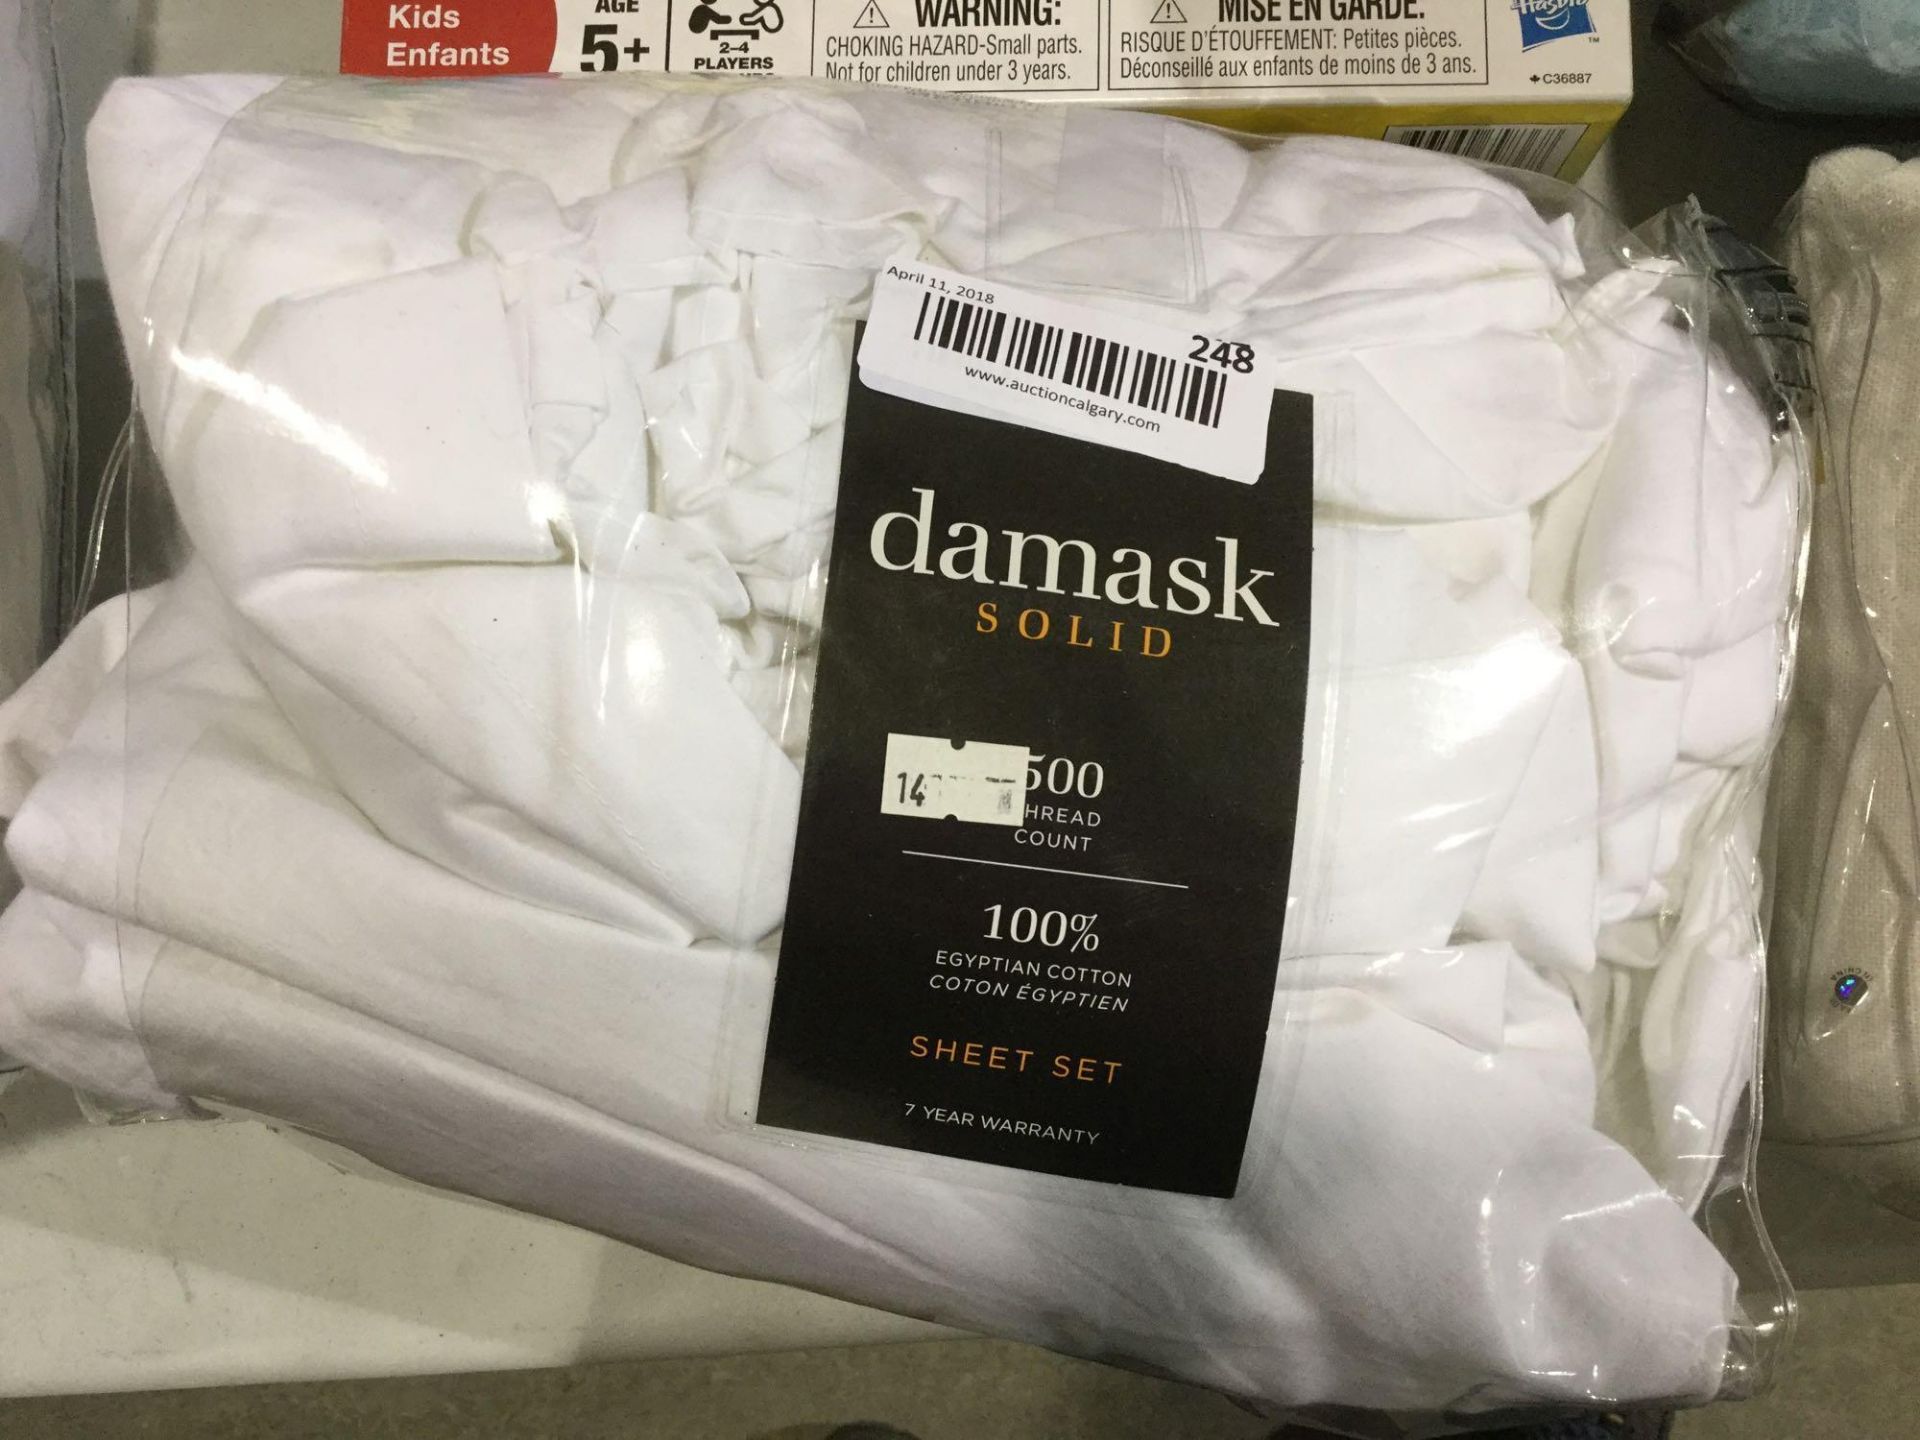 Damask Solid 500 Thread Count - Sheet set - White Queen